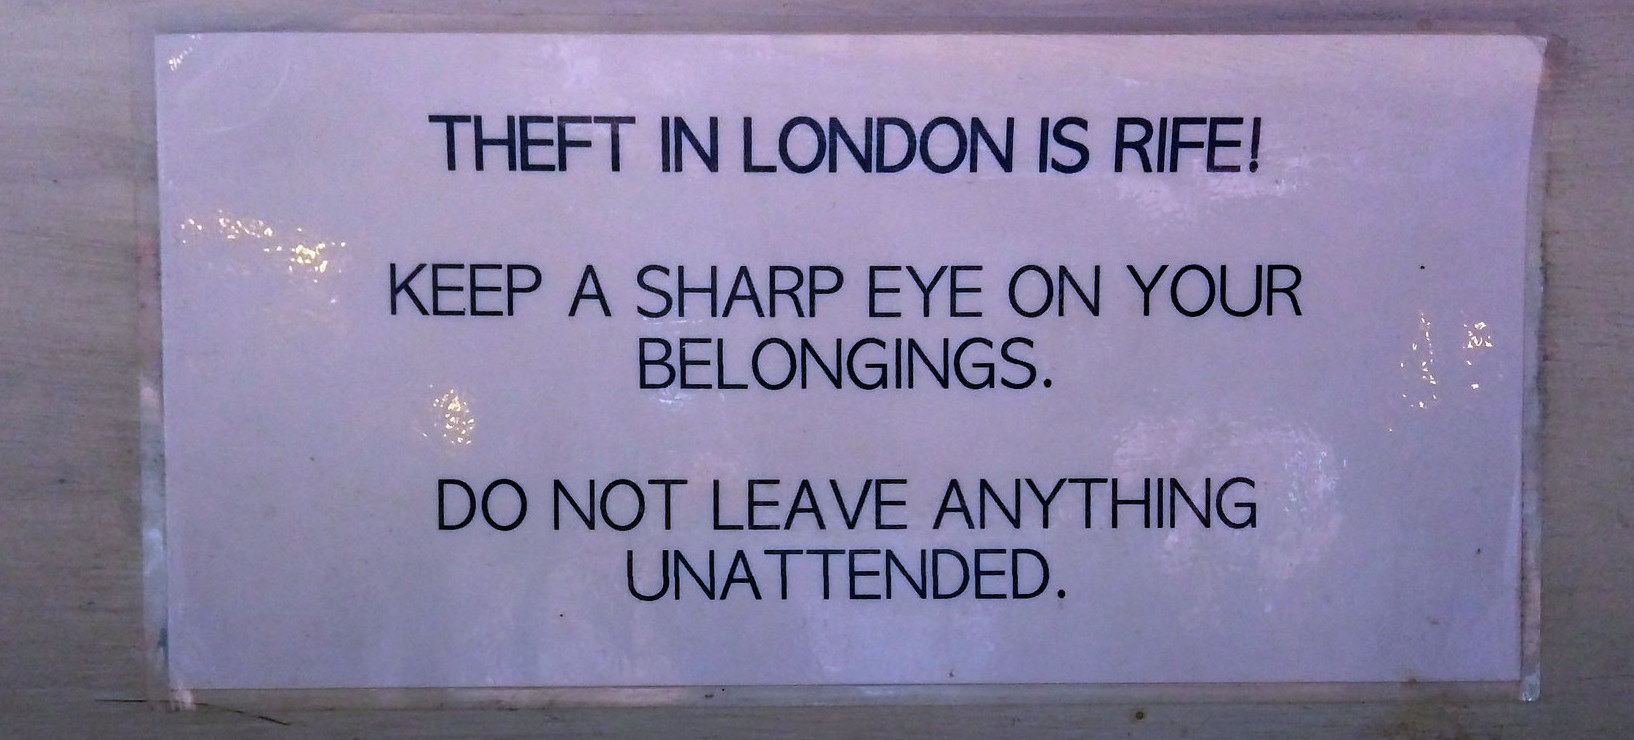 Theft In London